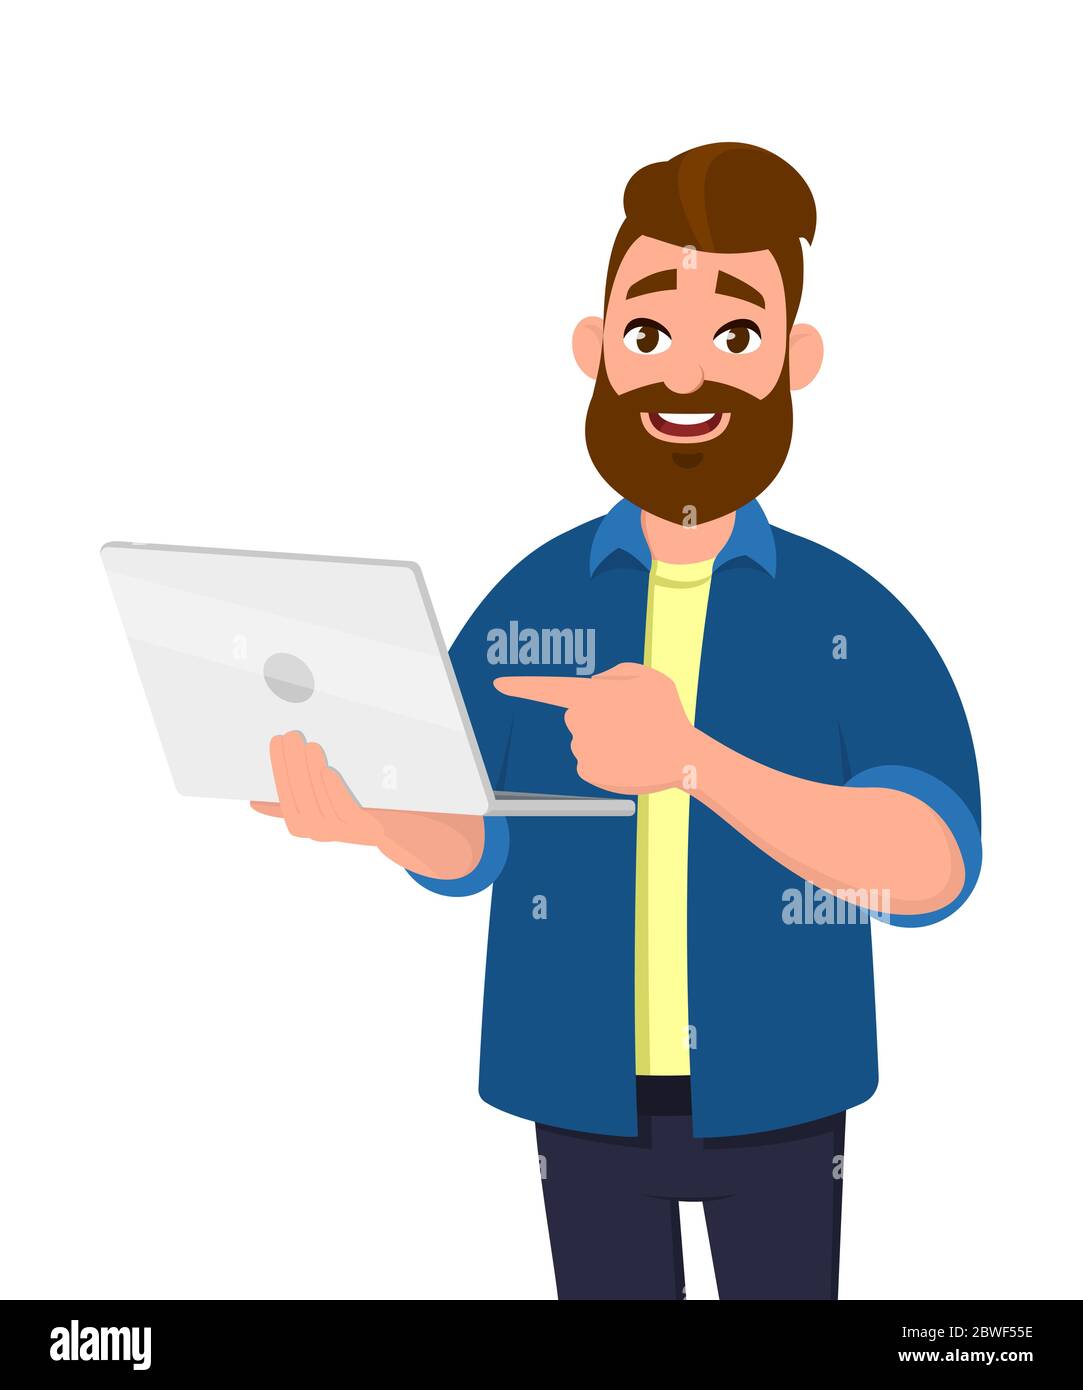 Successful young man holding laptop computer (PC) and pointing towards that. Laptop computer technology concept in vector illustration style. Stock Vector